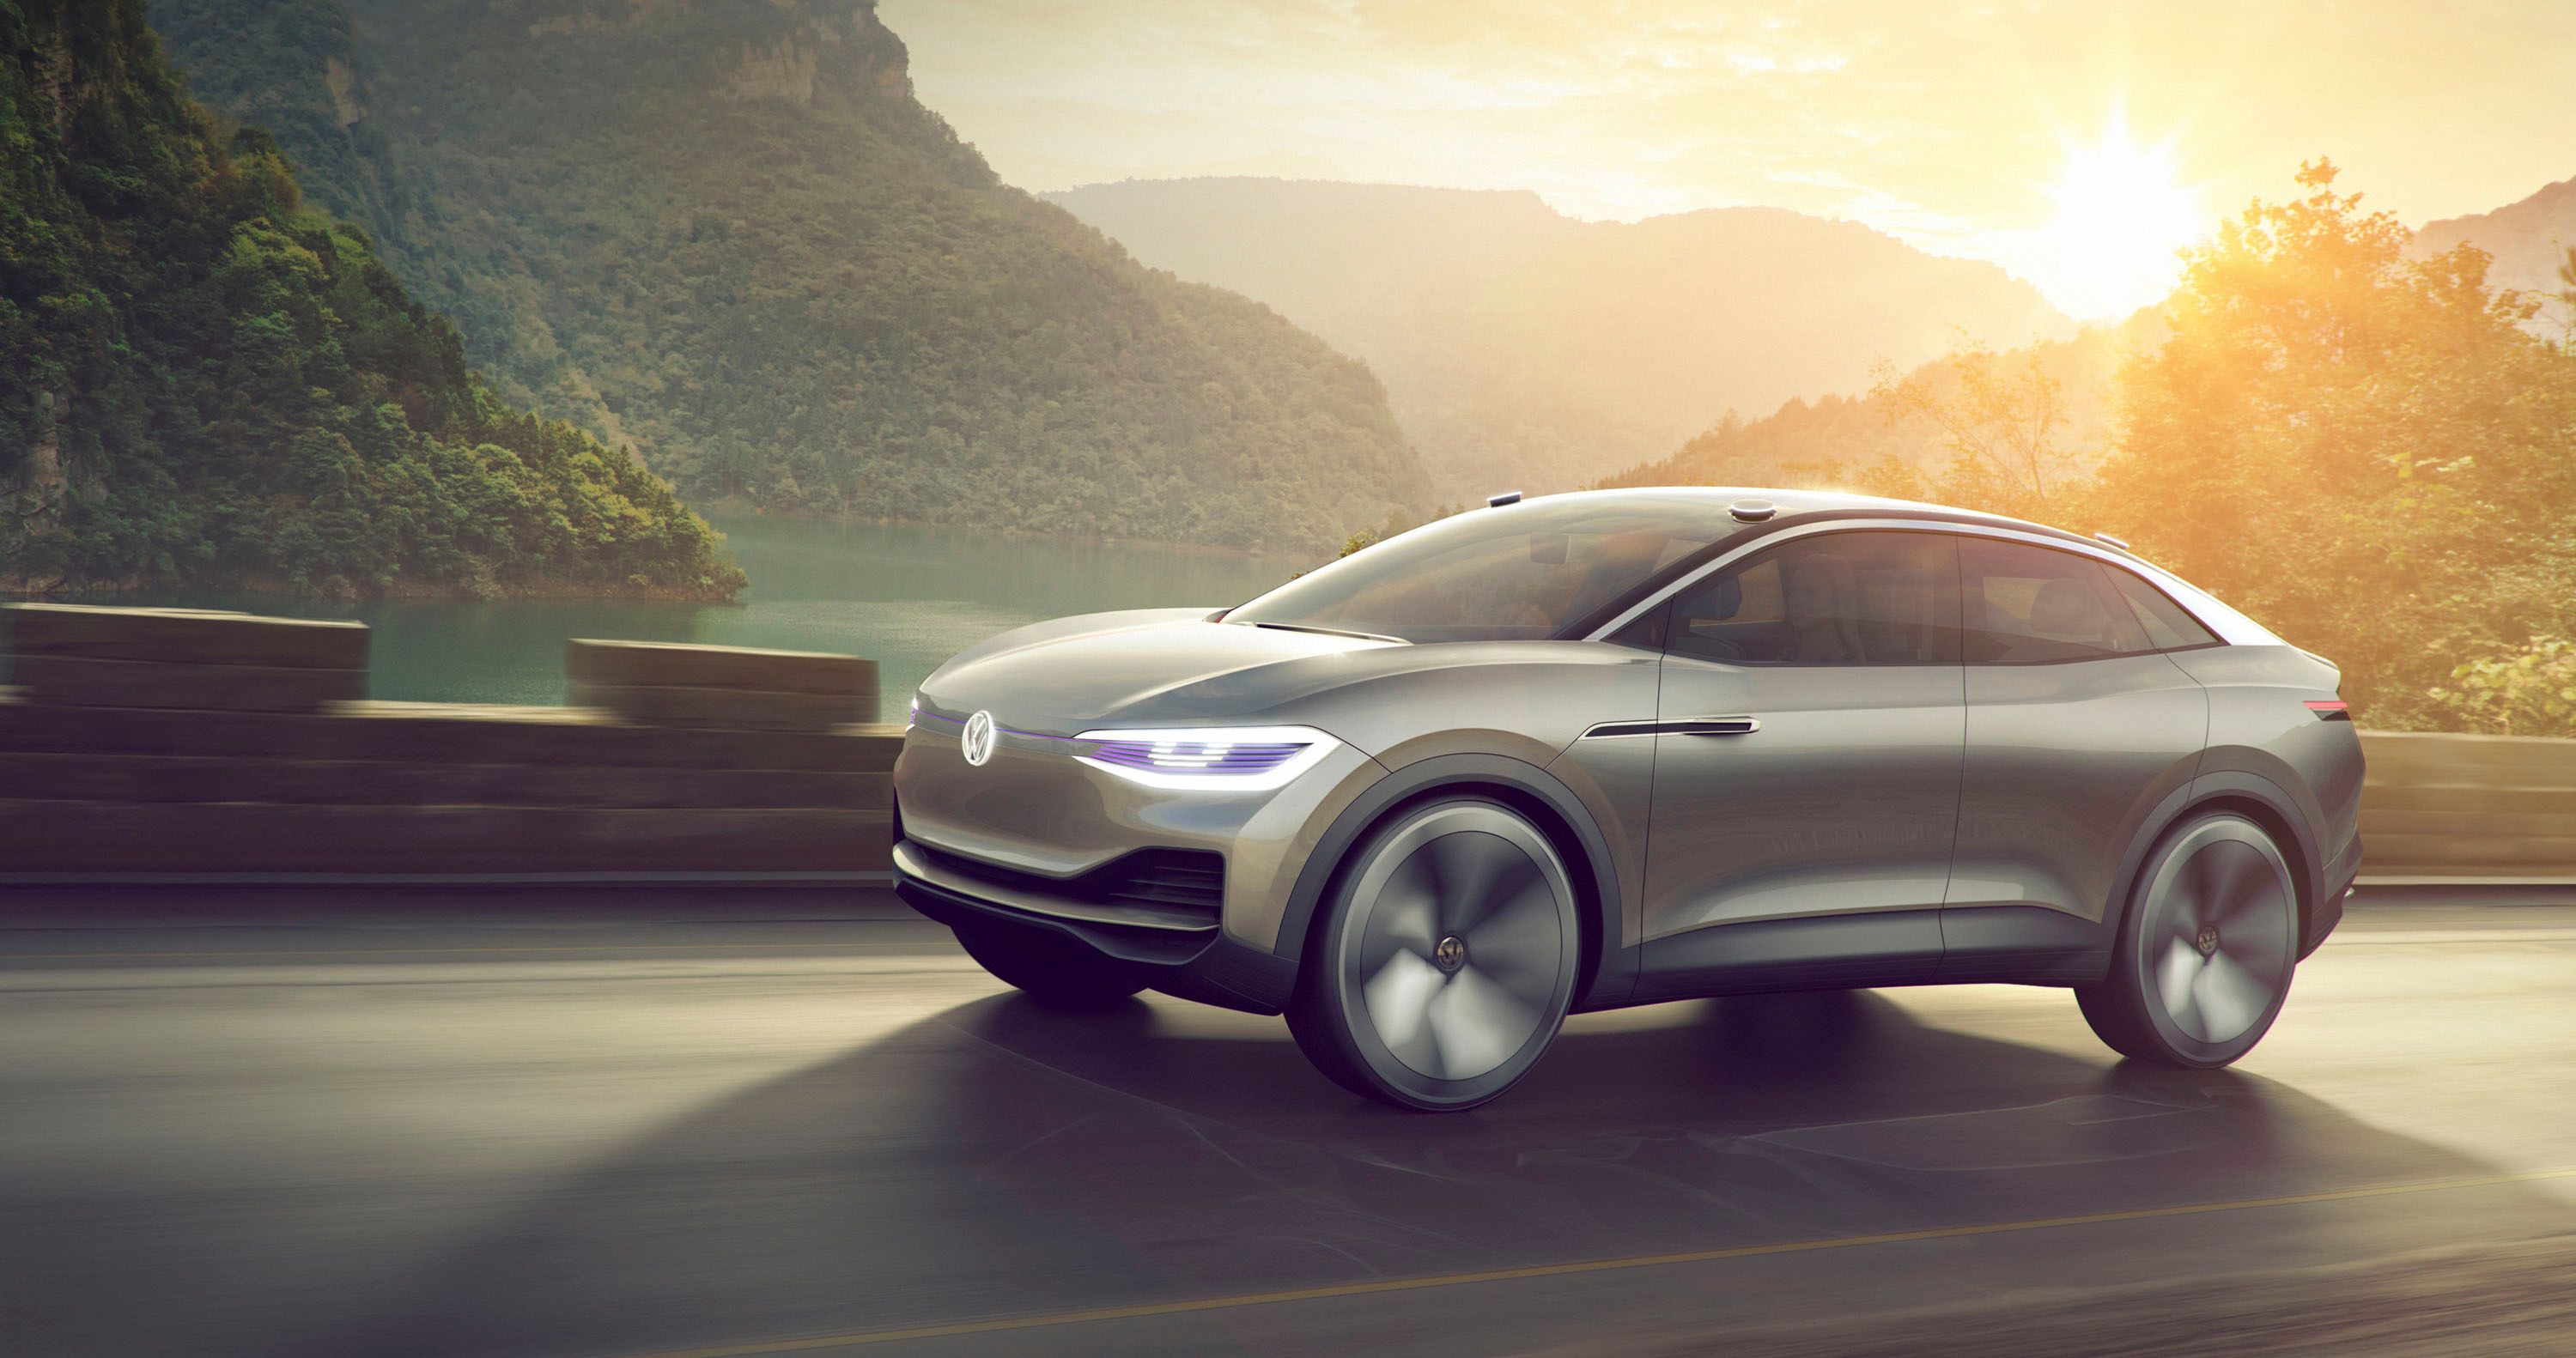 2017 Volkswagen Rumored to Flood Segment With New Subcompact Crossover EV